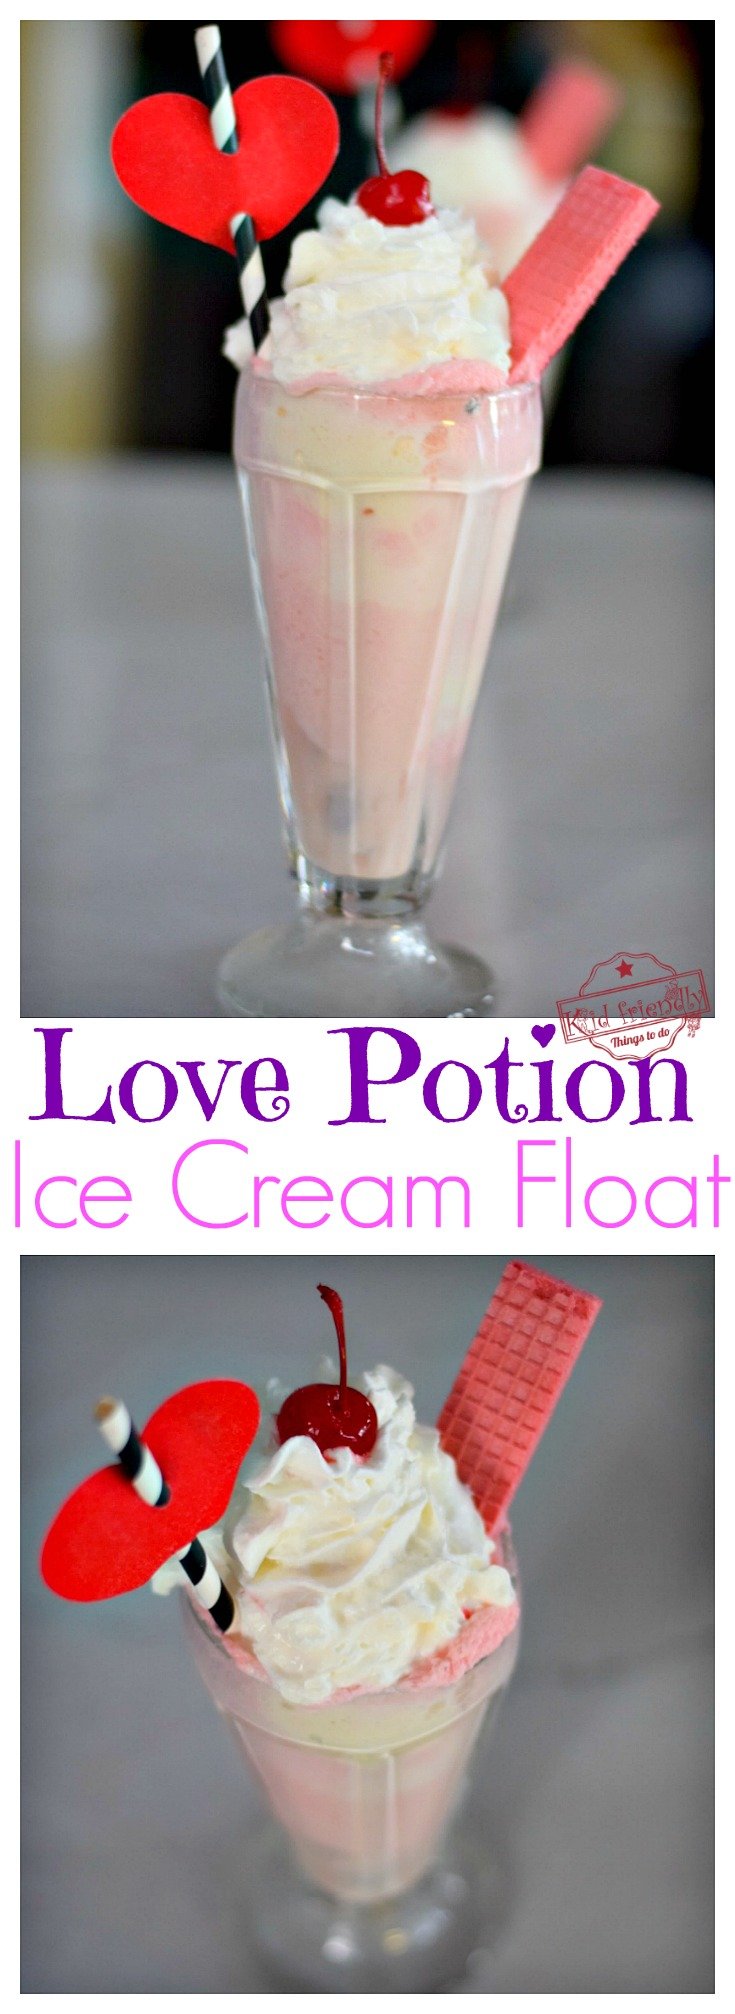 Love Potion Ice Cream Float - Easy Valentine's Drink to Make for Fun! - This is so easy and such and a great way to make the kids feel special. Perfect DIY fun food treat for Valentine's Day - www.kidfriendlythingstodo.com